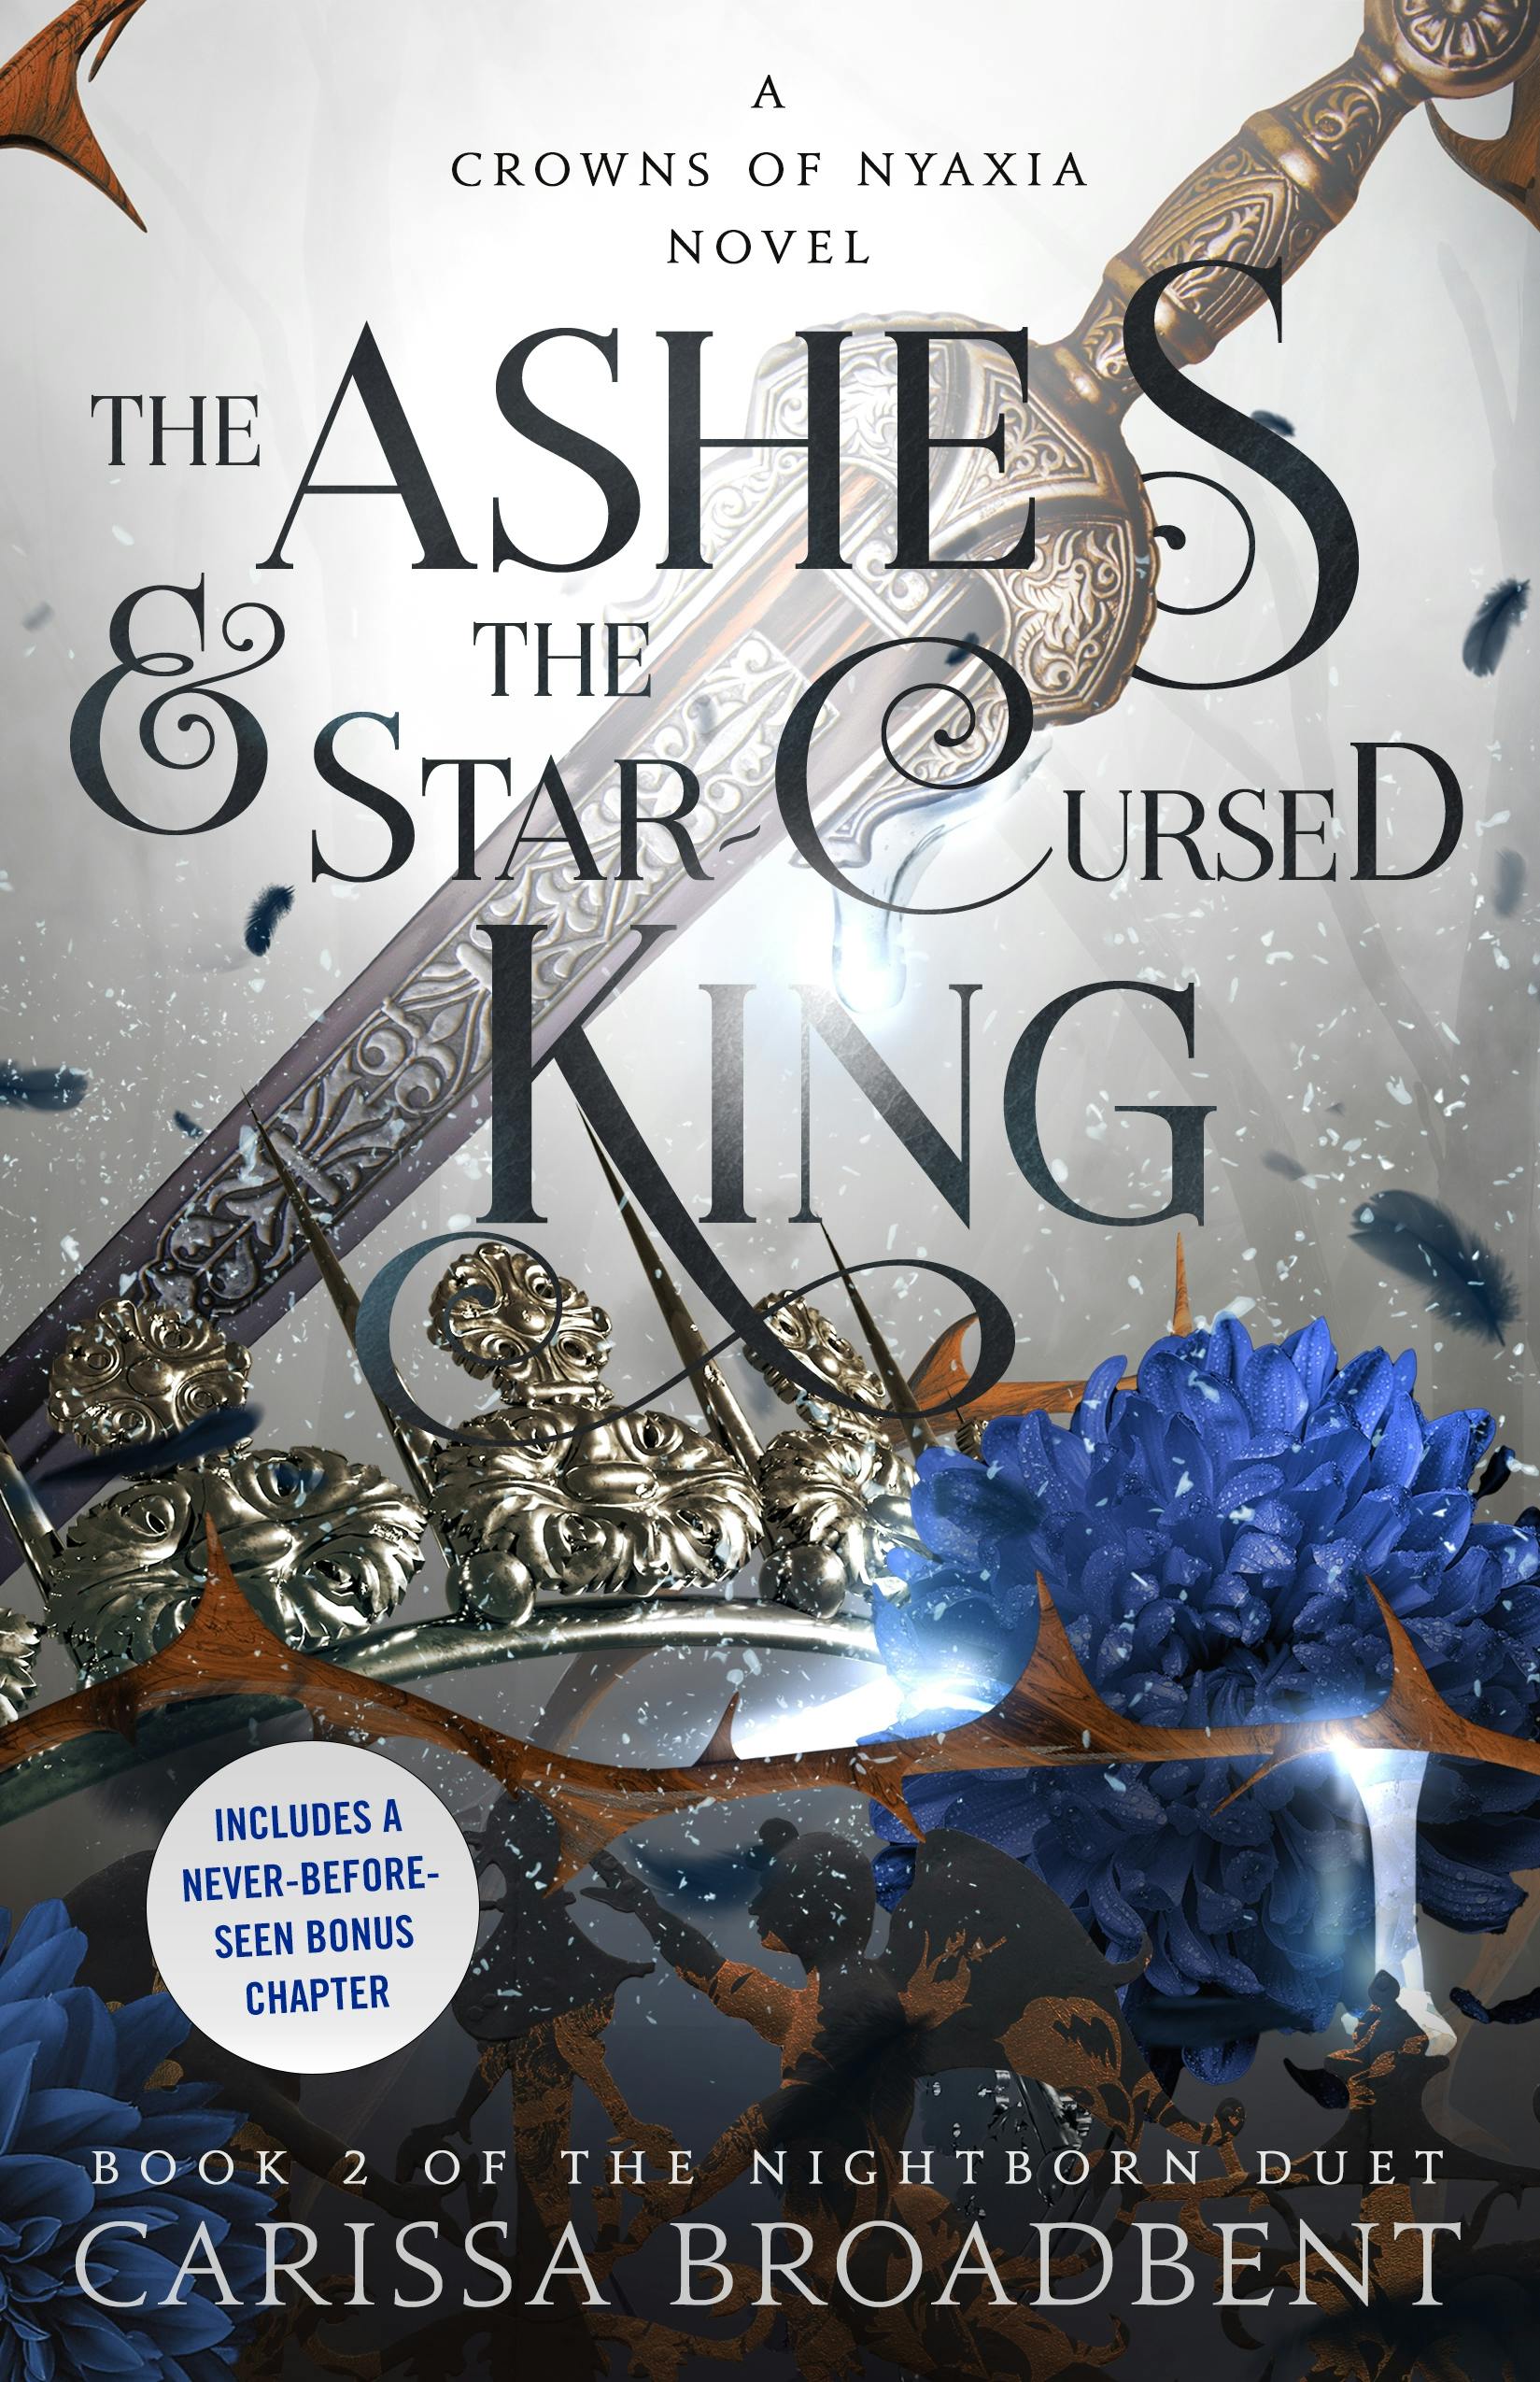 Cover for the book titled as: The Ashes & the Star-Cursed King